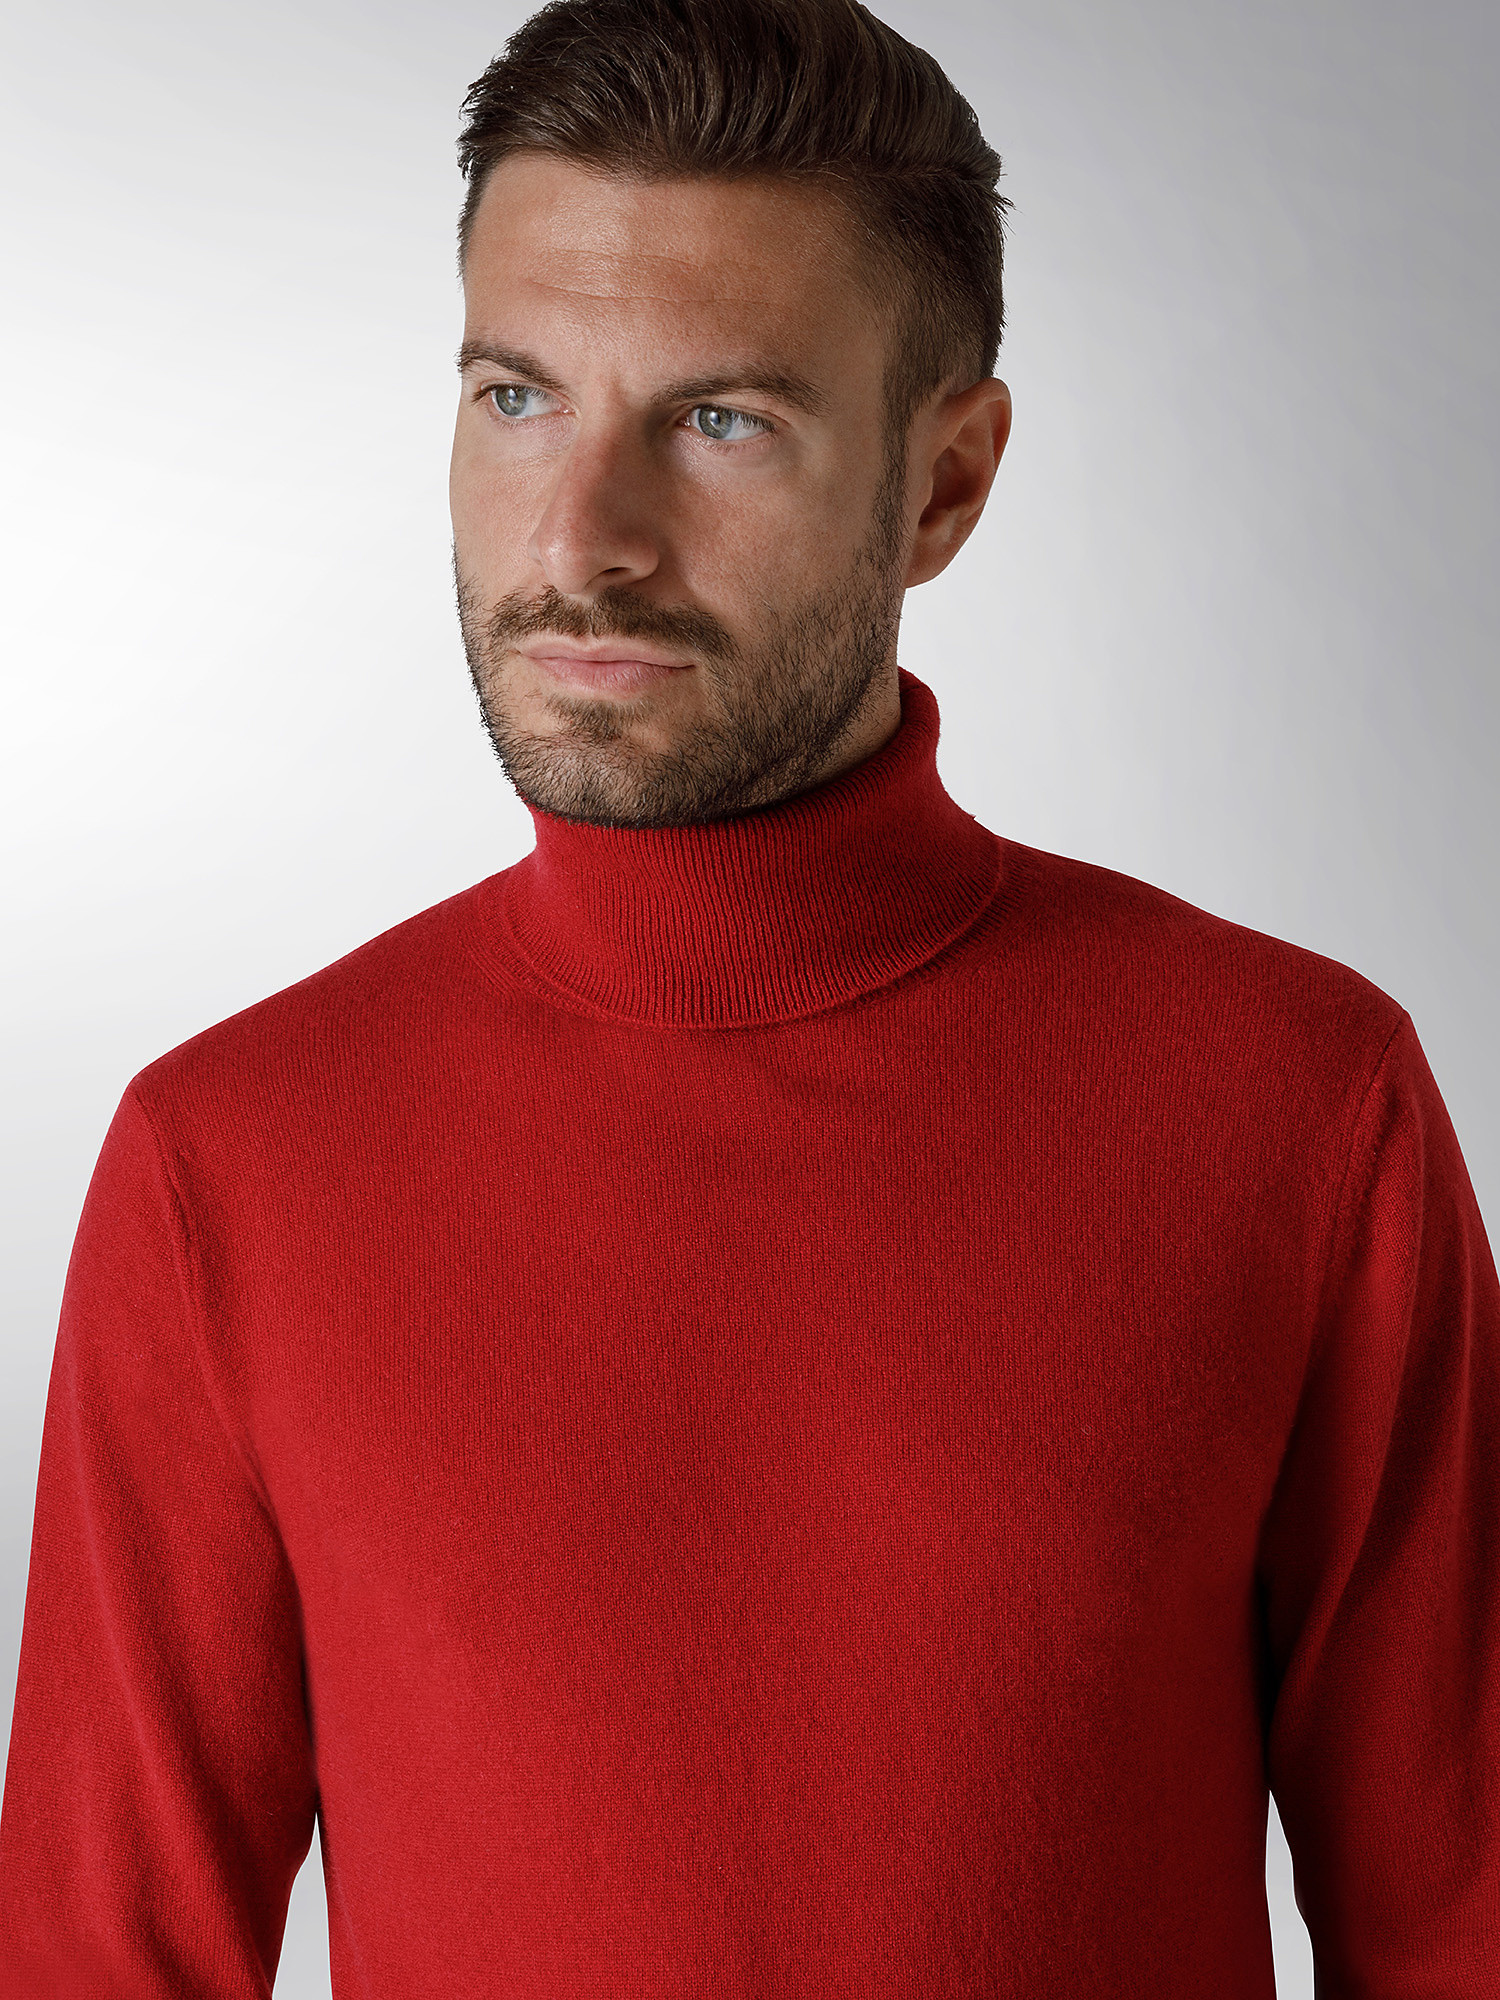 Coin Cashmere - Turtleneck in pure cashmere, Red, large image number 3